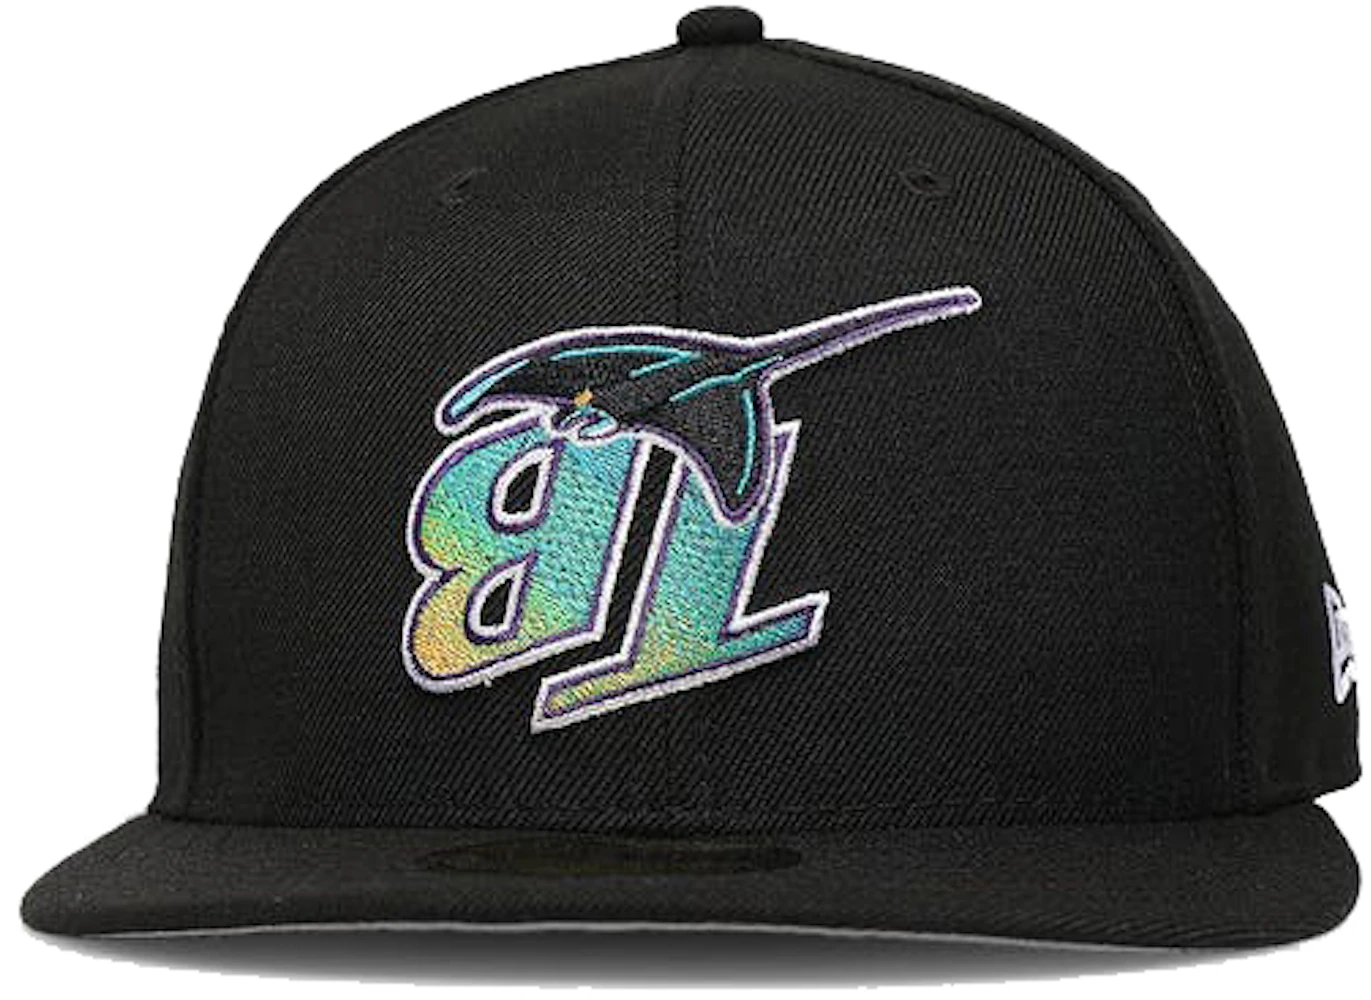 New Era Men's Stone and Navy Tampa Bay Rays Retro 59FIFTY Fitted Hat